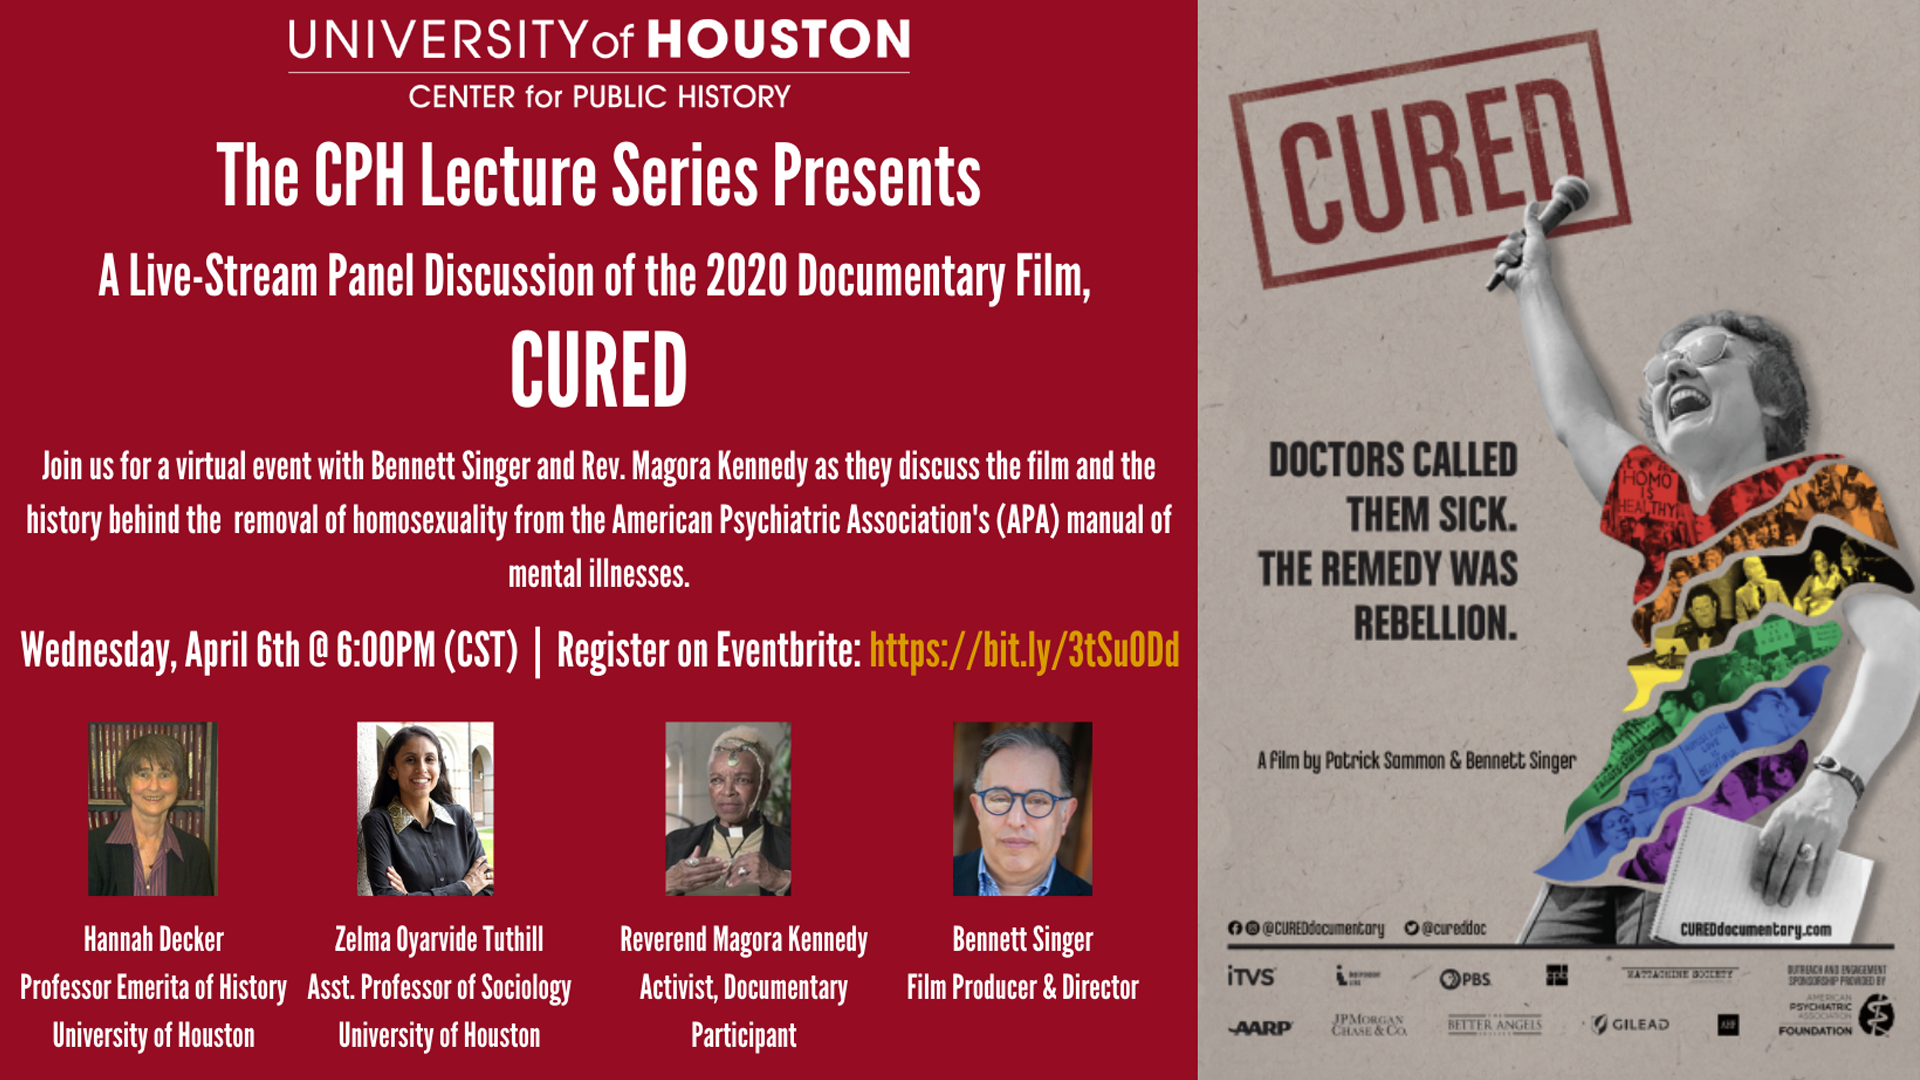 CURED Documentary Panel Discussion